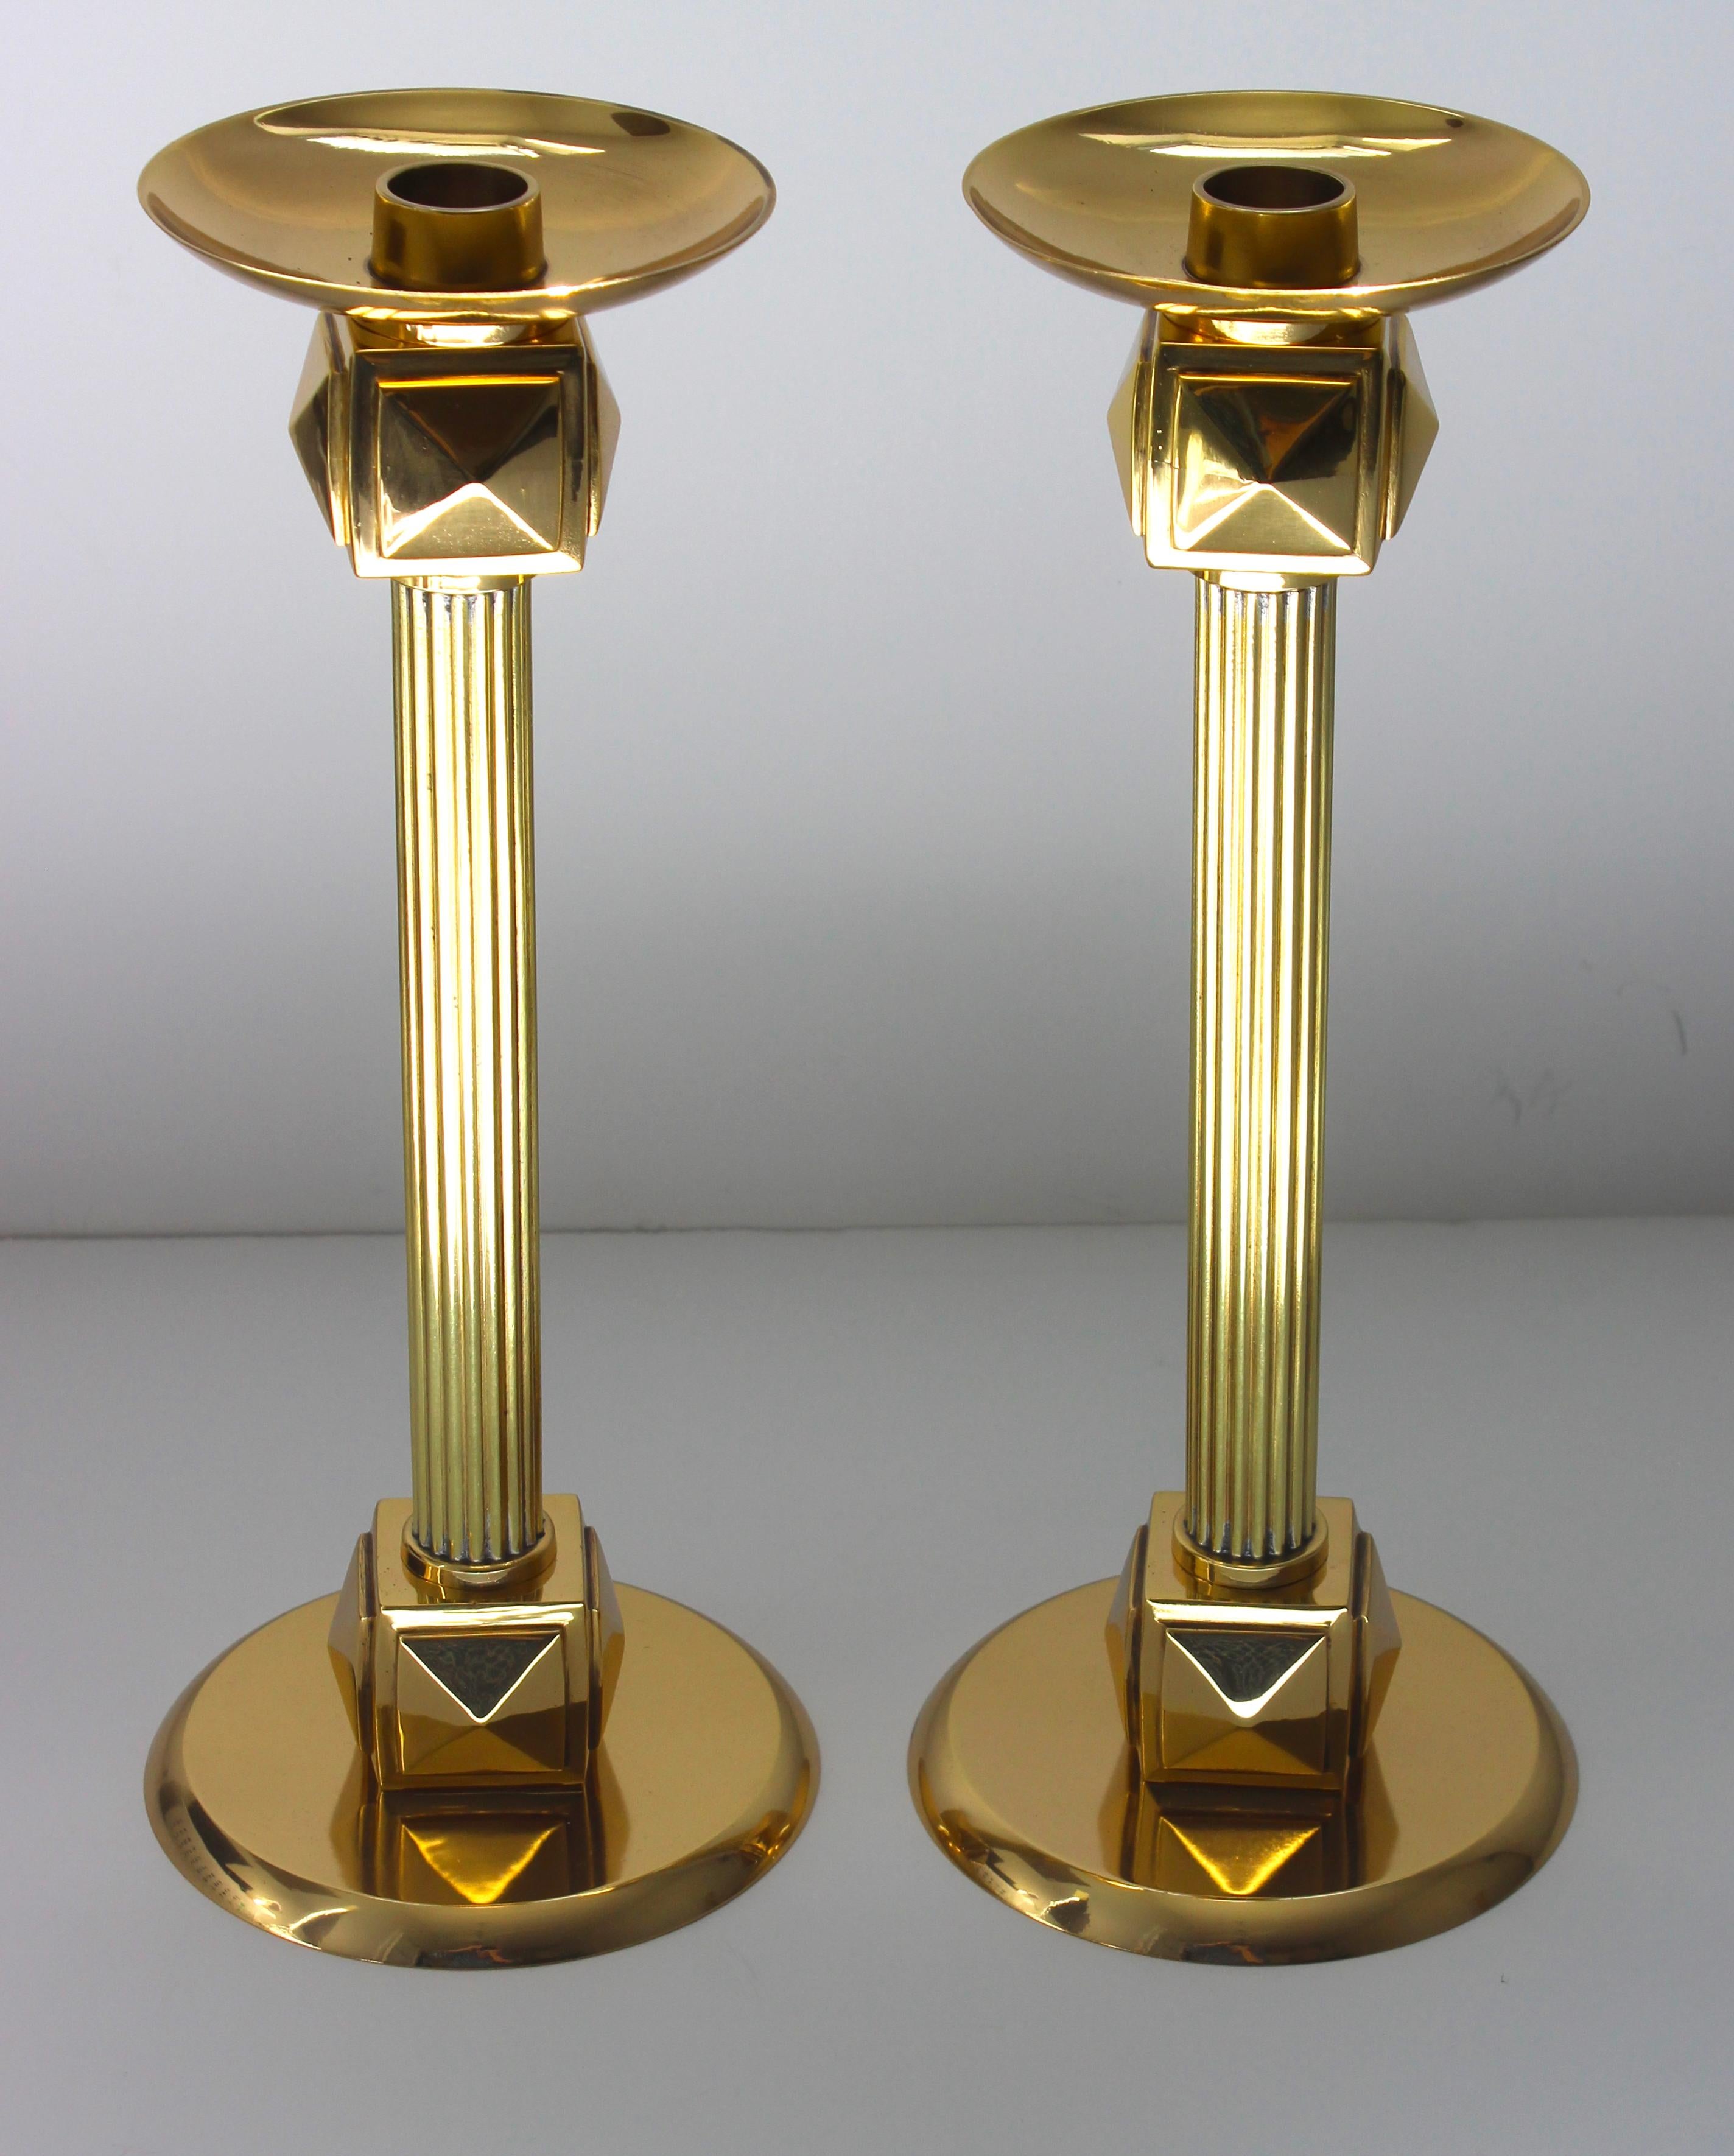 This stylish Art Deco style candlesticks date to the late 1970s-1980s and were designed by the American interior designer Larry Laslo.

Note: These have been professionally polished and finished with a clear lacquer, so no tarnishing.

 